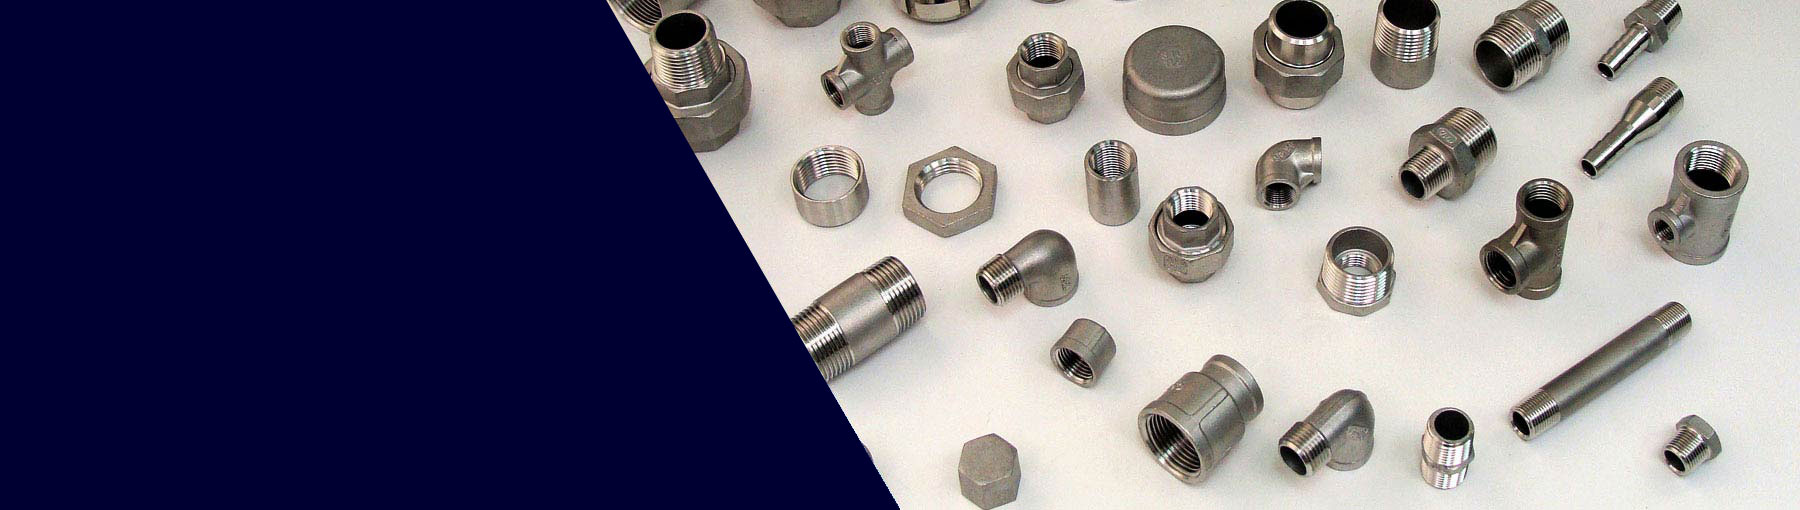 MS Hex Nut Bolt In Godhra, Best MS Hex Nut Bolt Suppliers Godhra